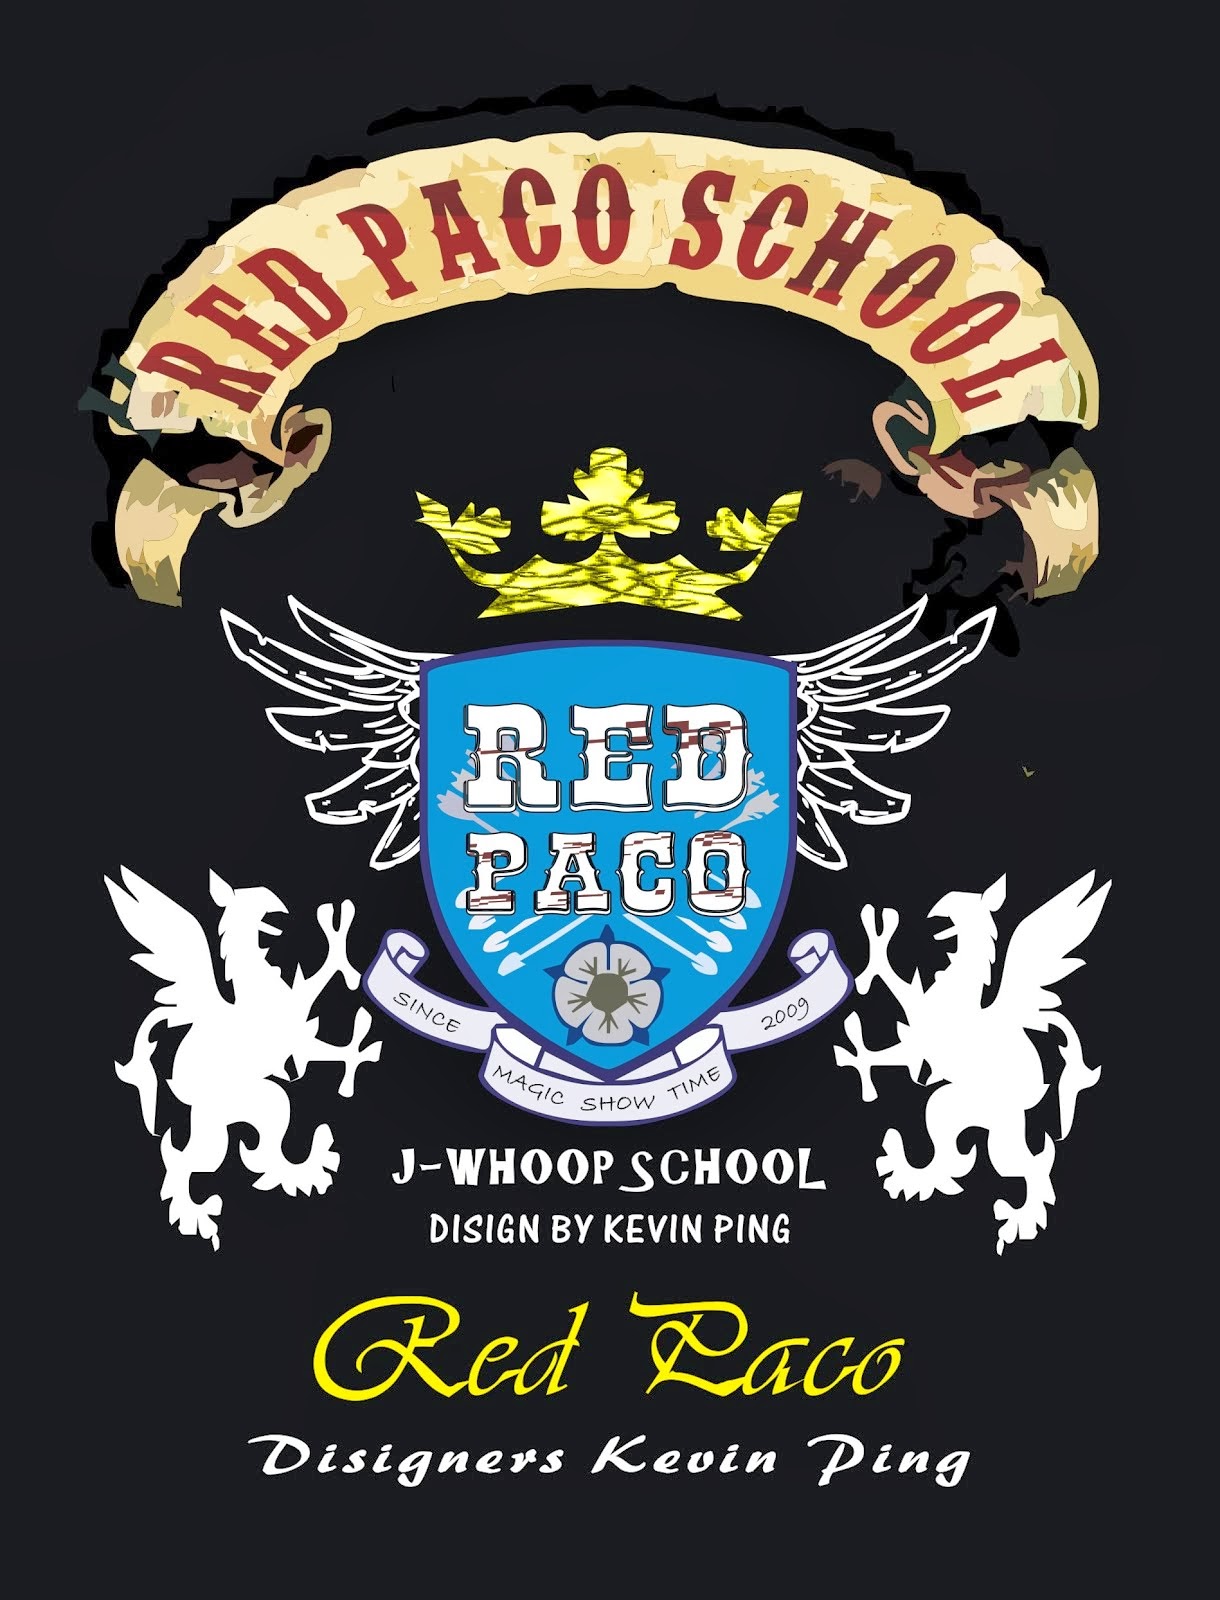 RED PACO MAGIC SCHOOL DISIGNERS KEVIN PING